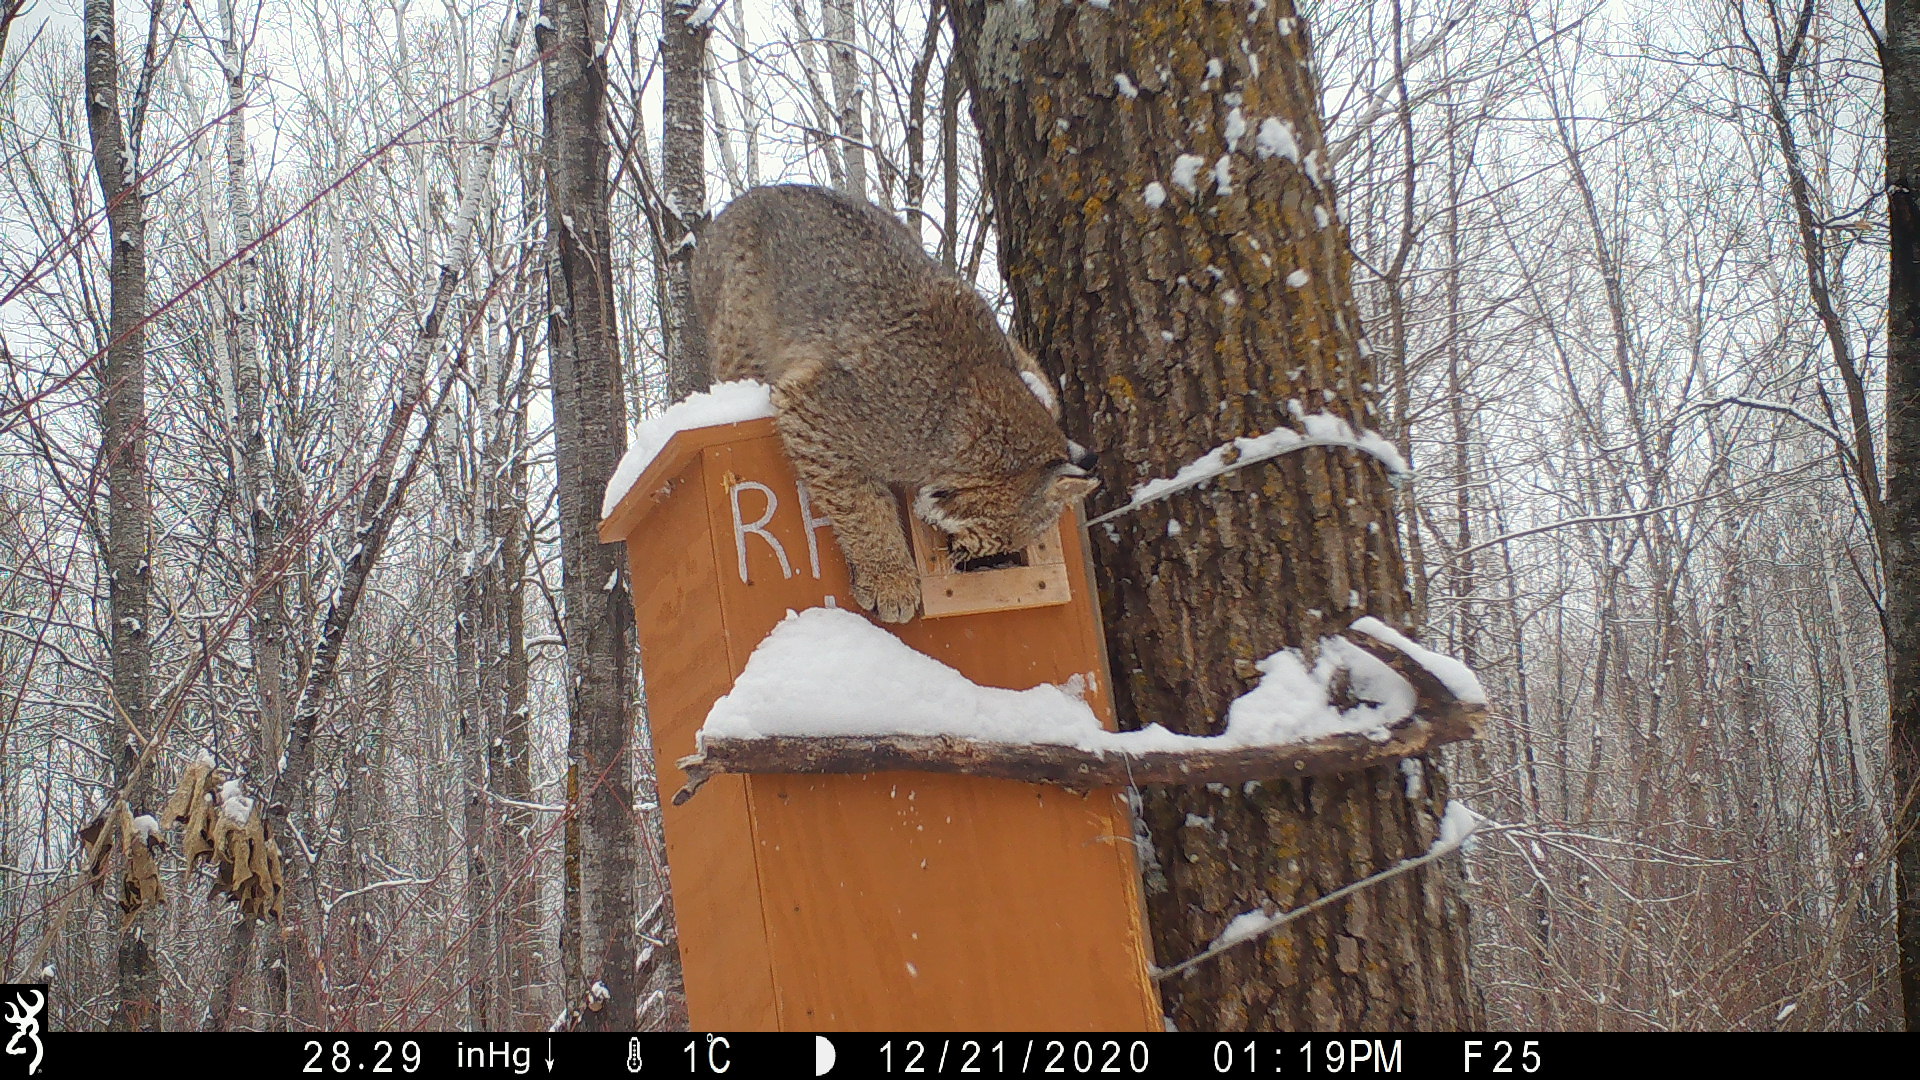 A bobcat atop a wooden den box attached to a tree attempting to enter small doorway.